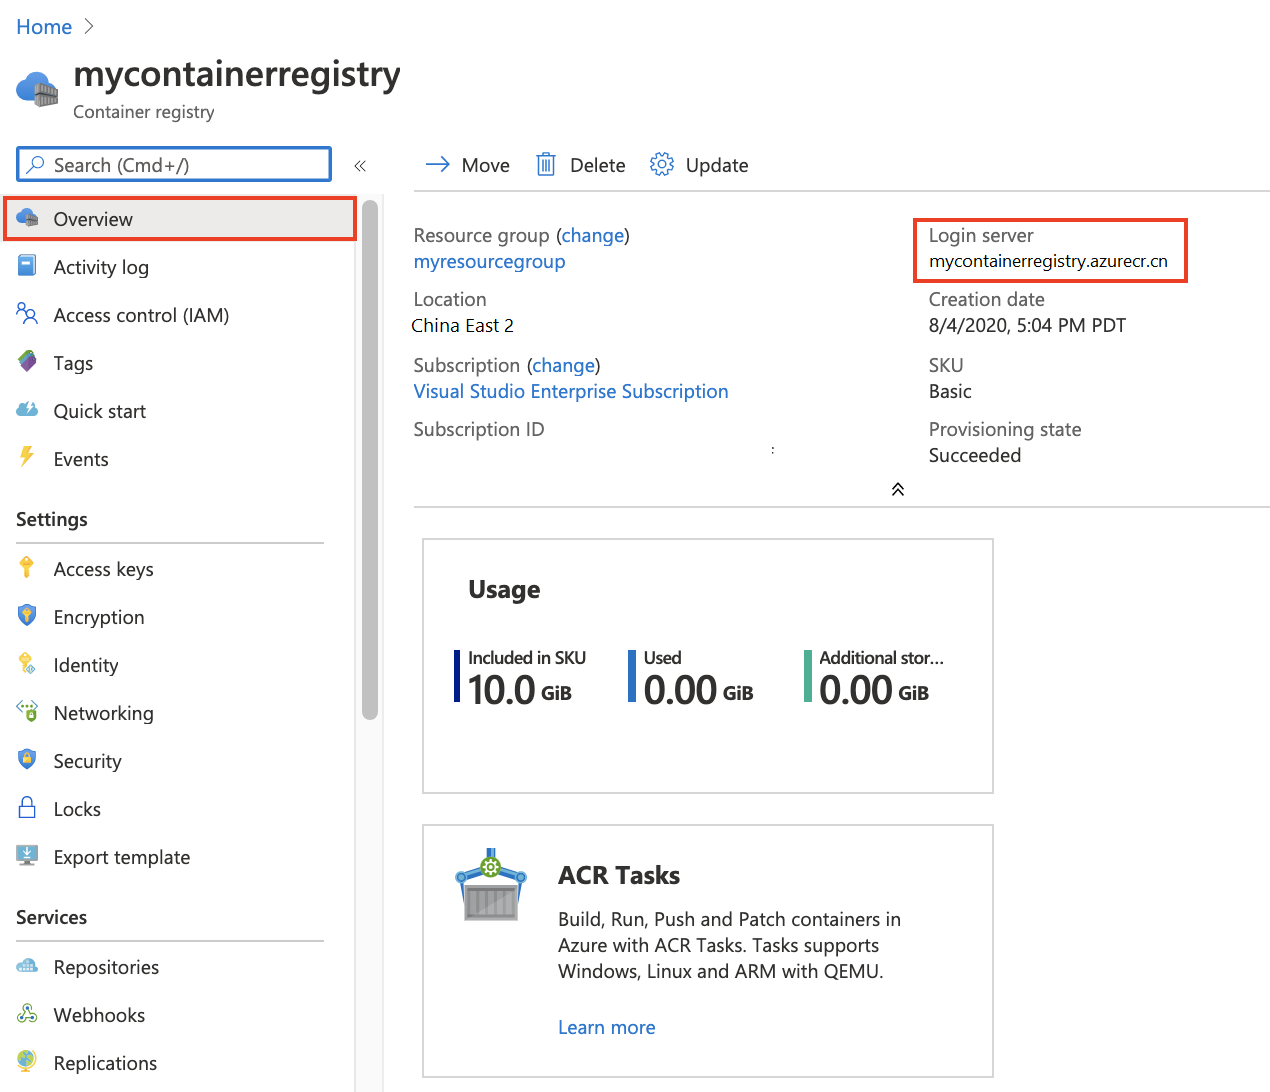 Container registry Overview in the portal